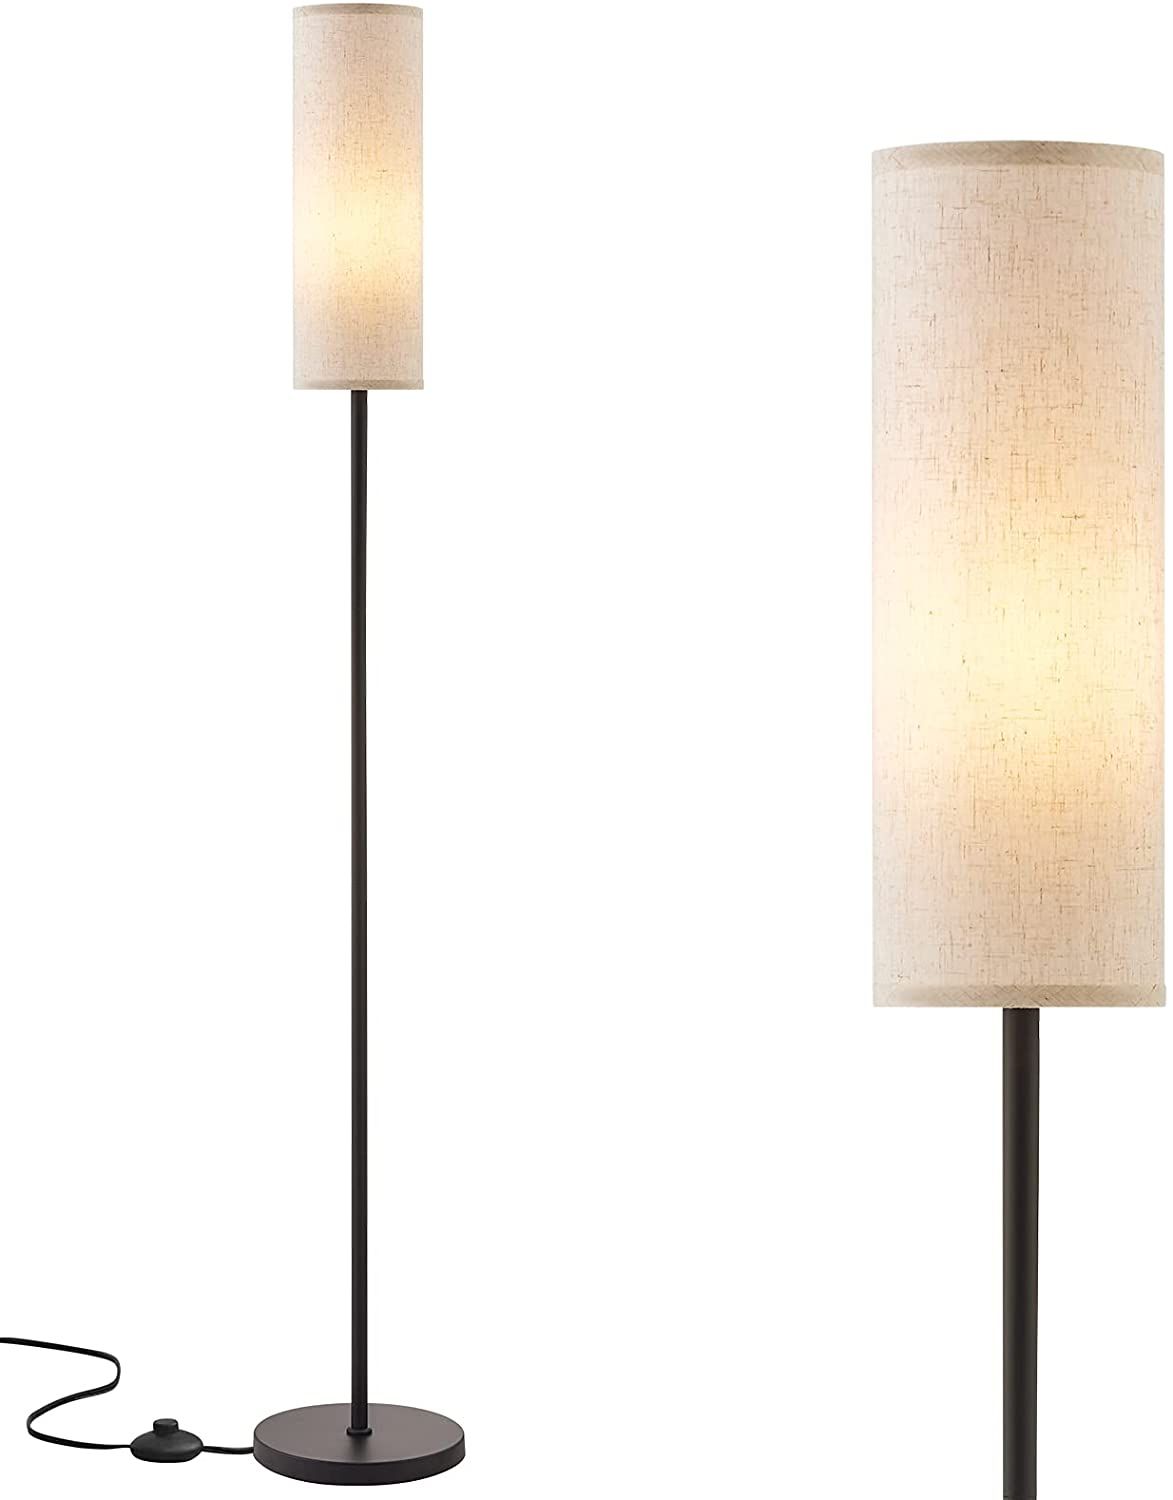 Floor Lamp For Living Room Modern – Pole Lamps For Bedrooms Tall,modern  Standing Lamps With Lampshade, 65'' Tall Lamp Fo – Walmart With Regard To Modern Floor Lamps (View 11 of 15)